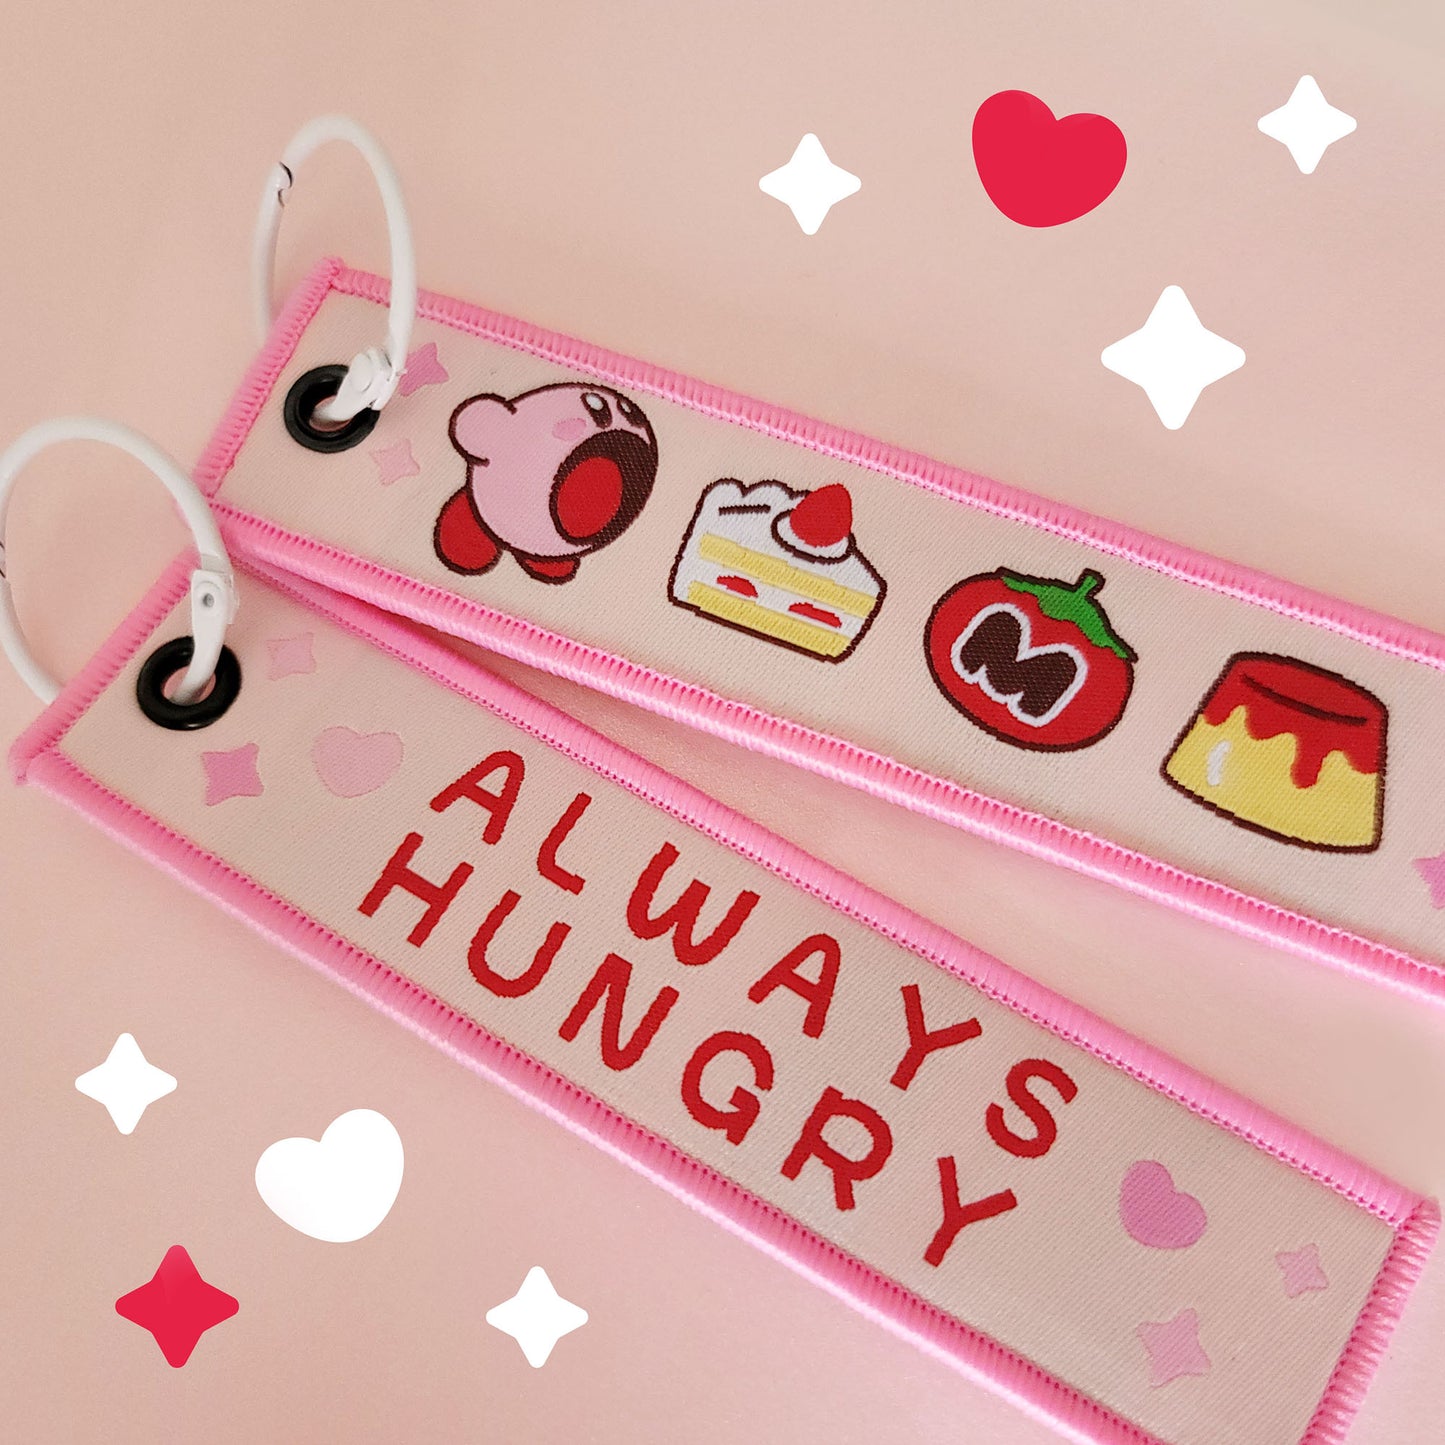 Ships from 22 June | Kirby Always Hungry Embroidered Tag